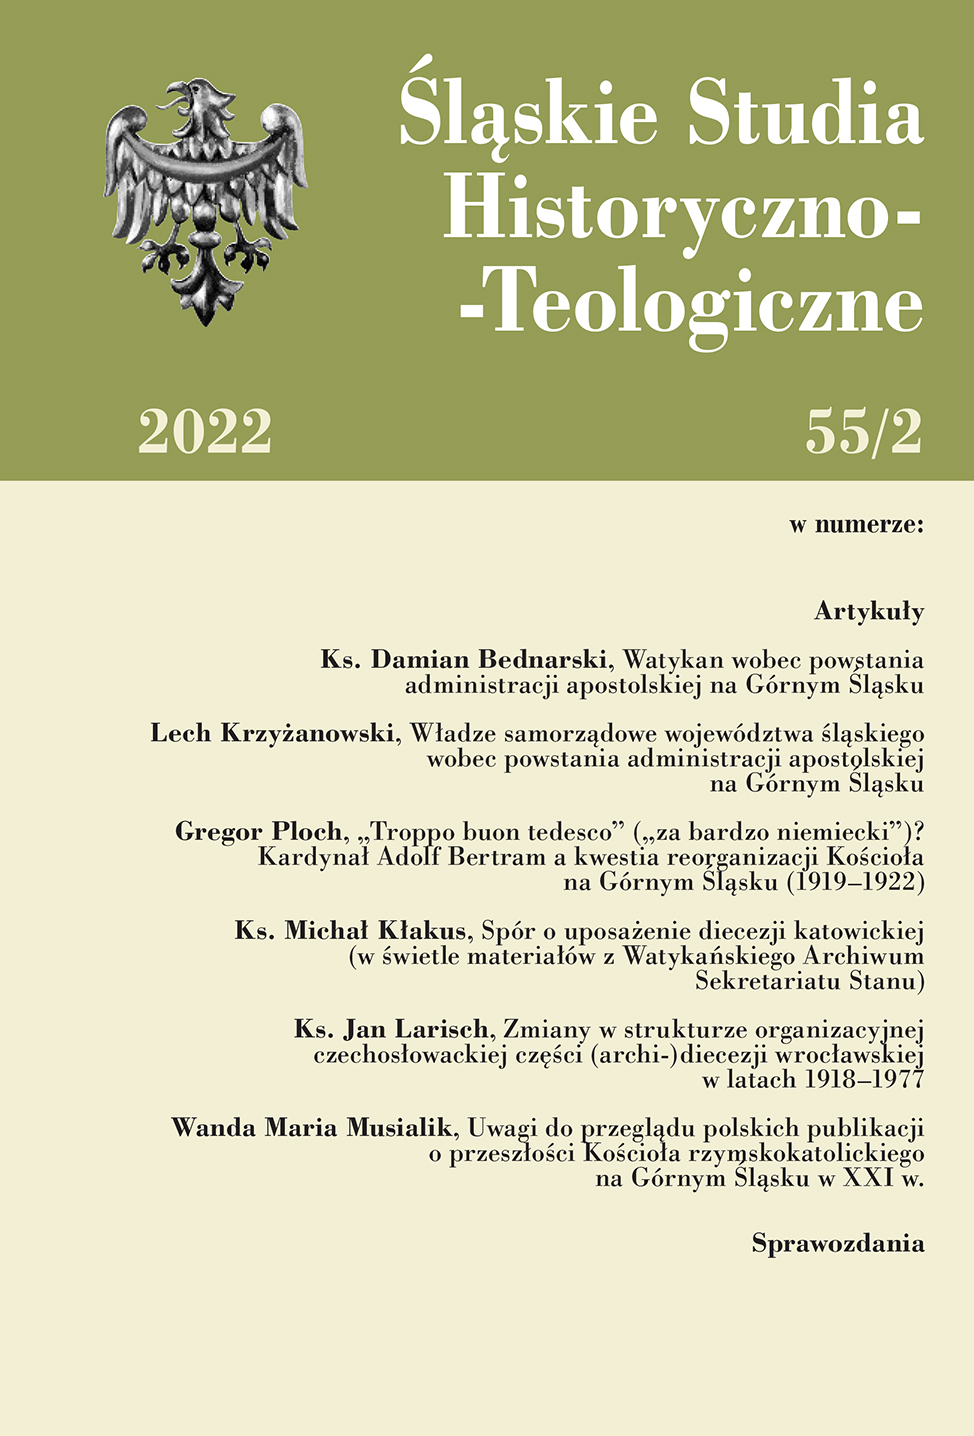 COMMENTS ON THE REVIEW OF POLISH PUBLICATIONS ON THE PAST OF THE ROMAN CATHOLIC CHURCH
IN UPPER SILESIA IN THE 21ST CENTURY Cover Image